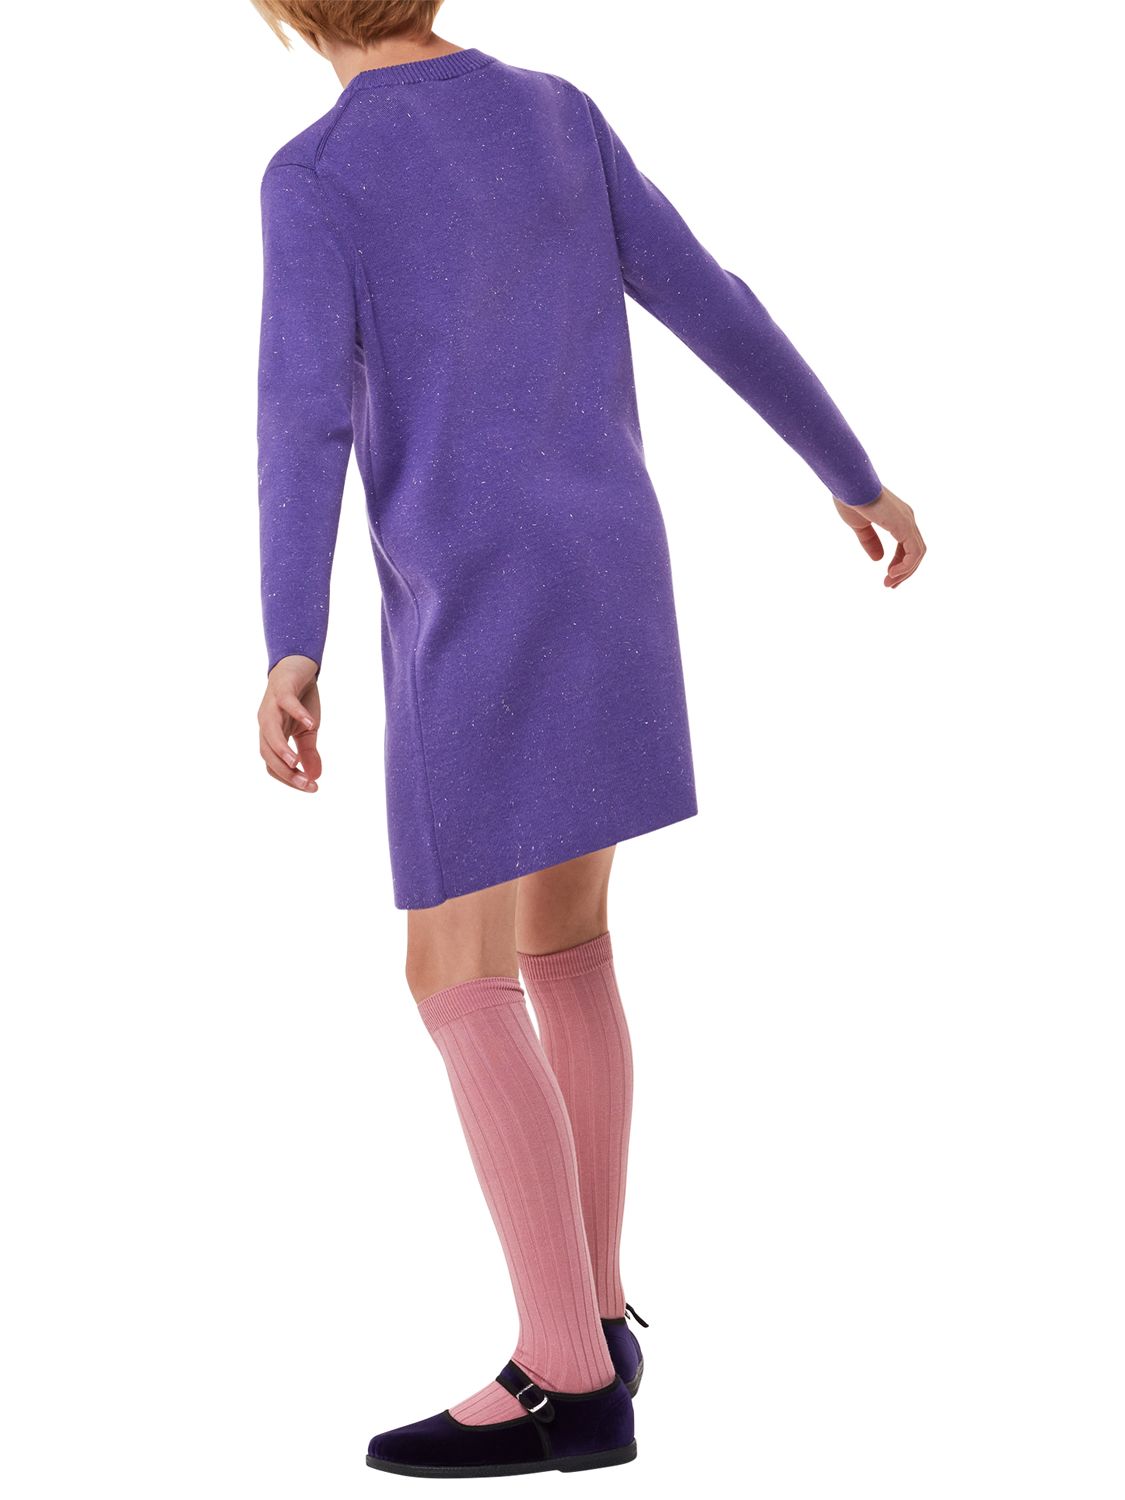 Whistles Kids' Annie Sparkle Knit Dress, Lilac, 3-4 years